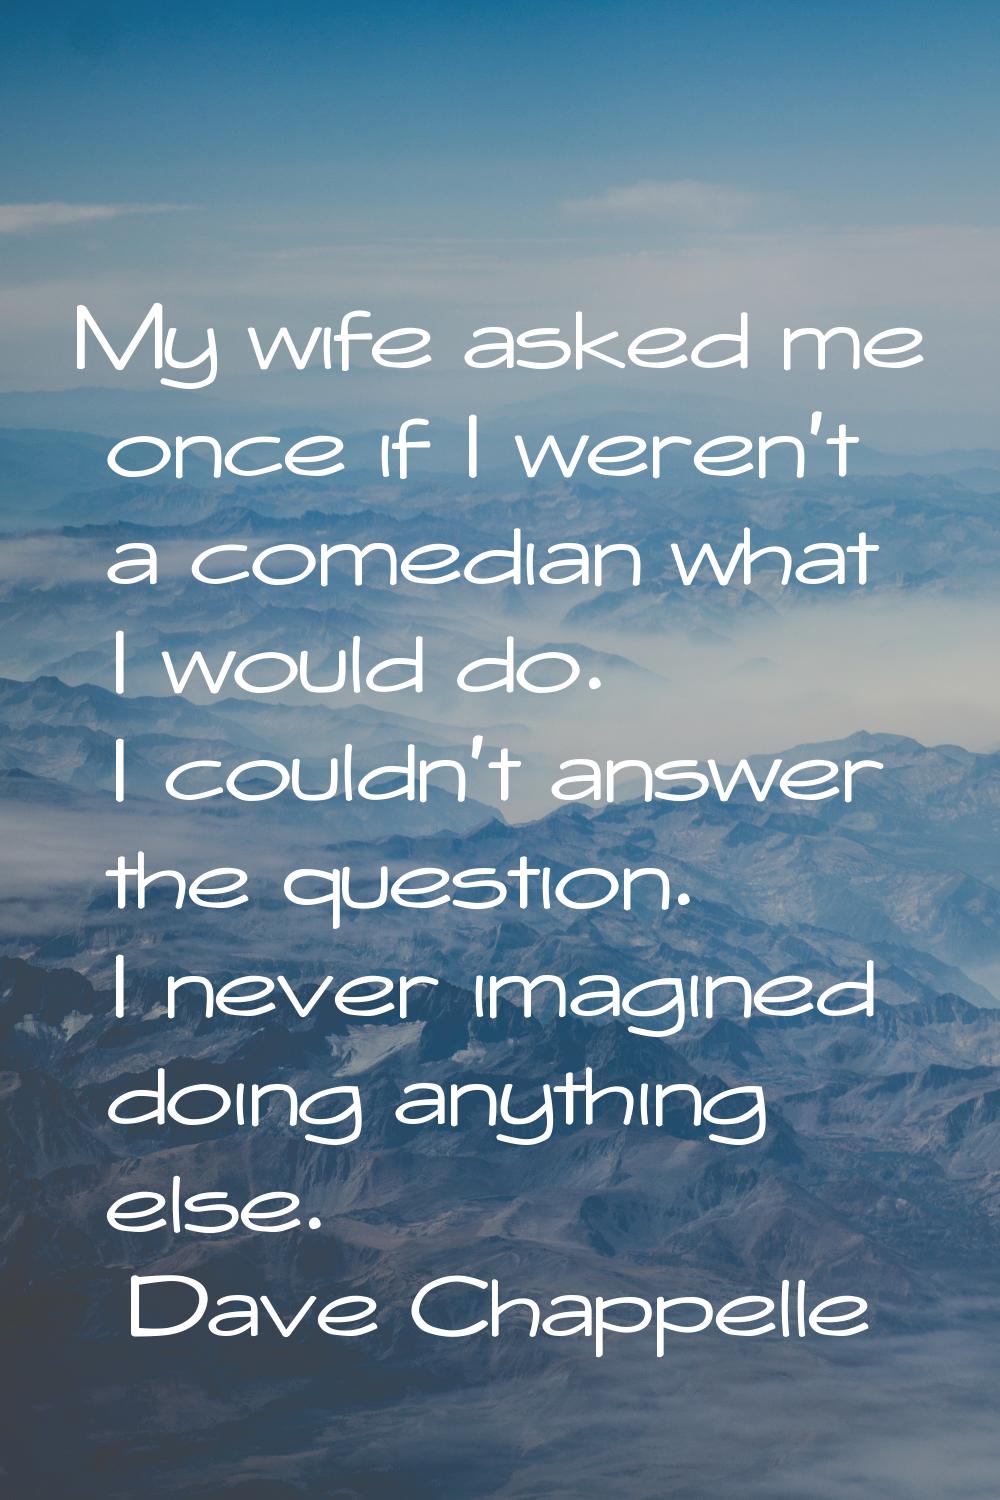 My wife asked me once if I weren't a comedian what I would do. I couldn't answer the question. I ne